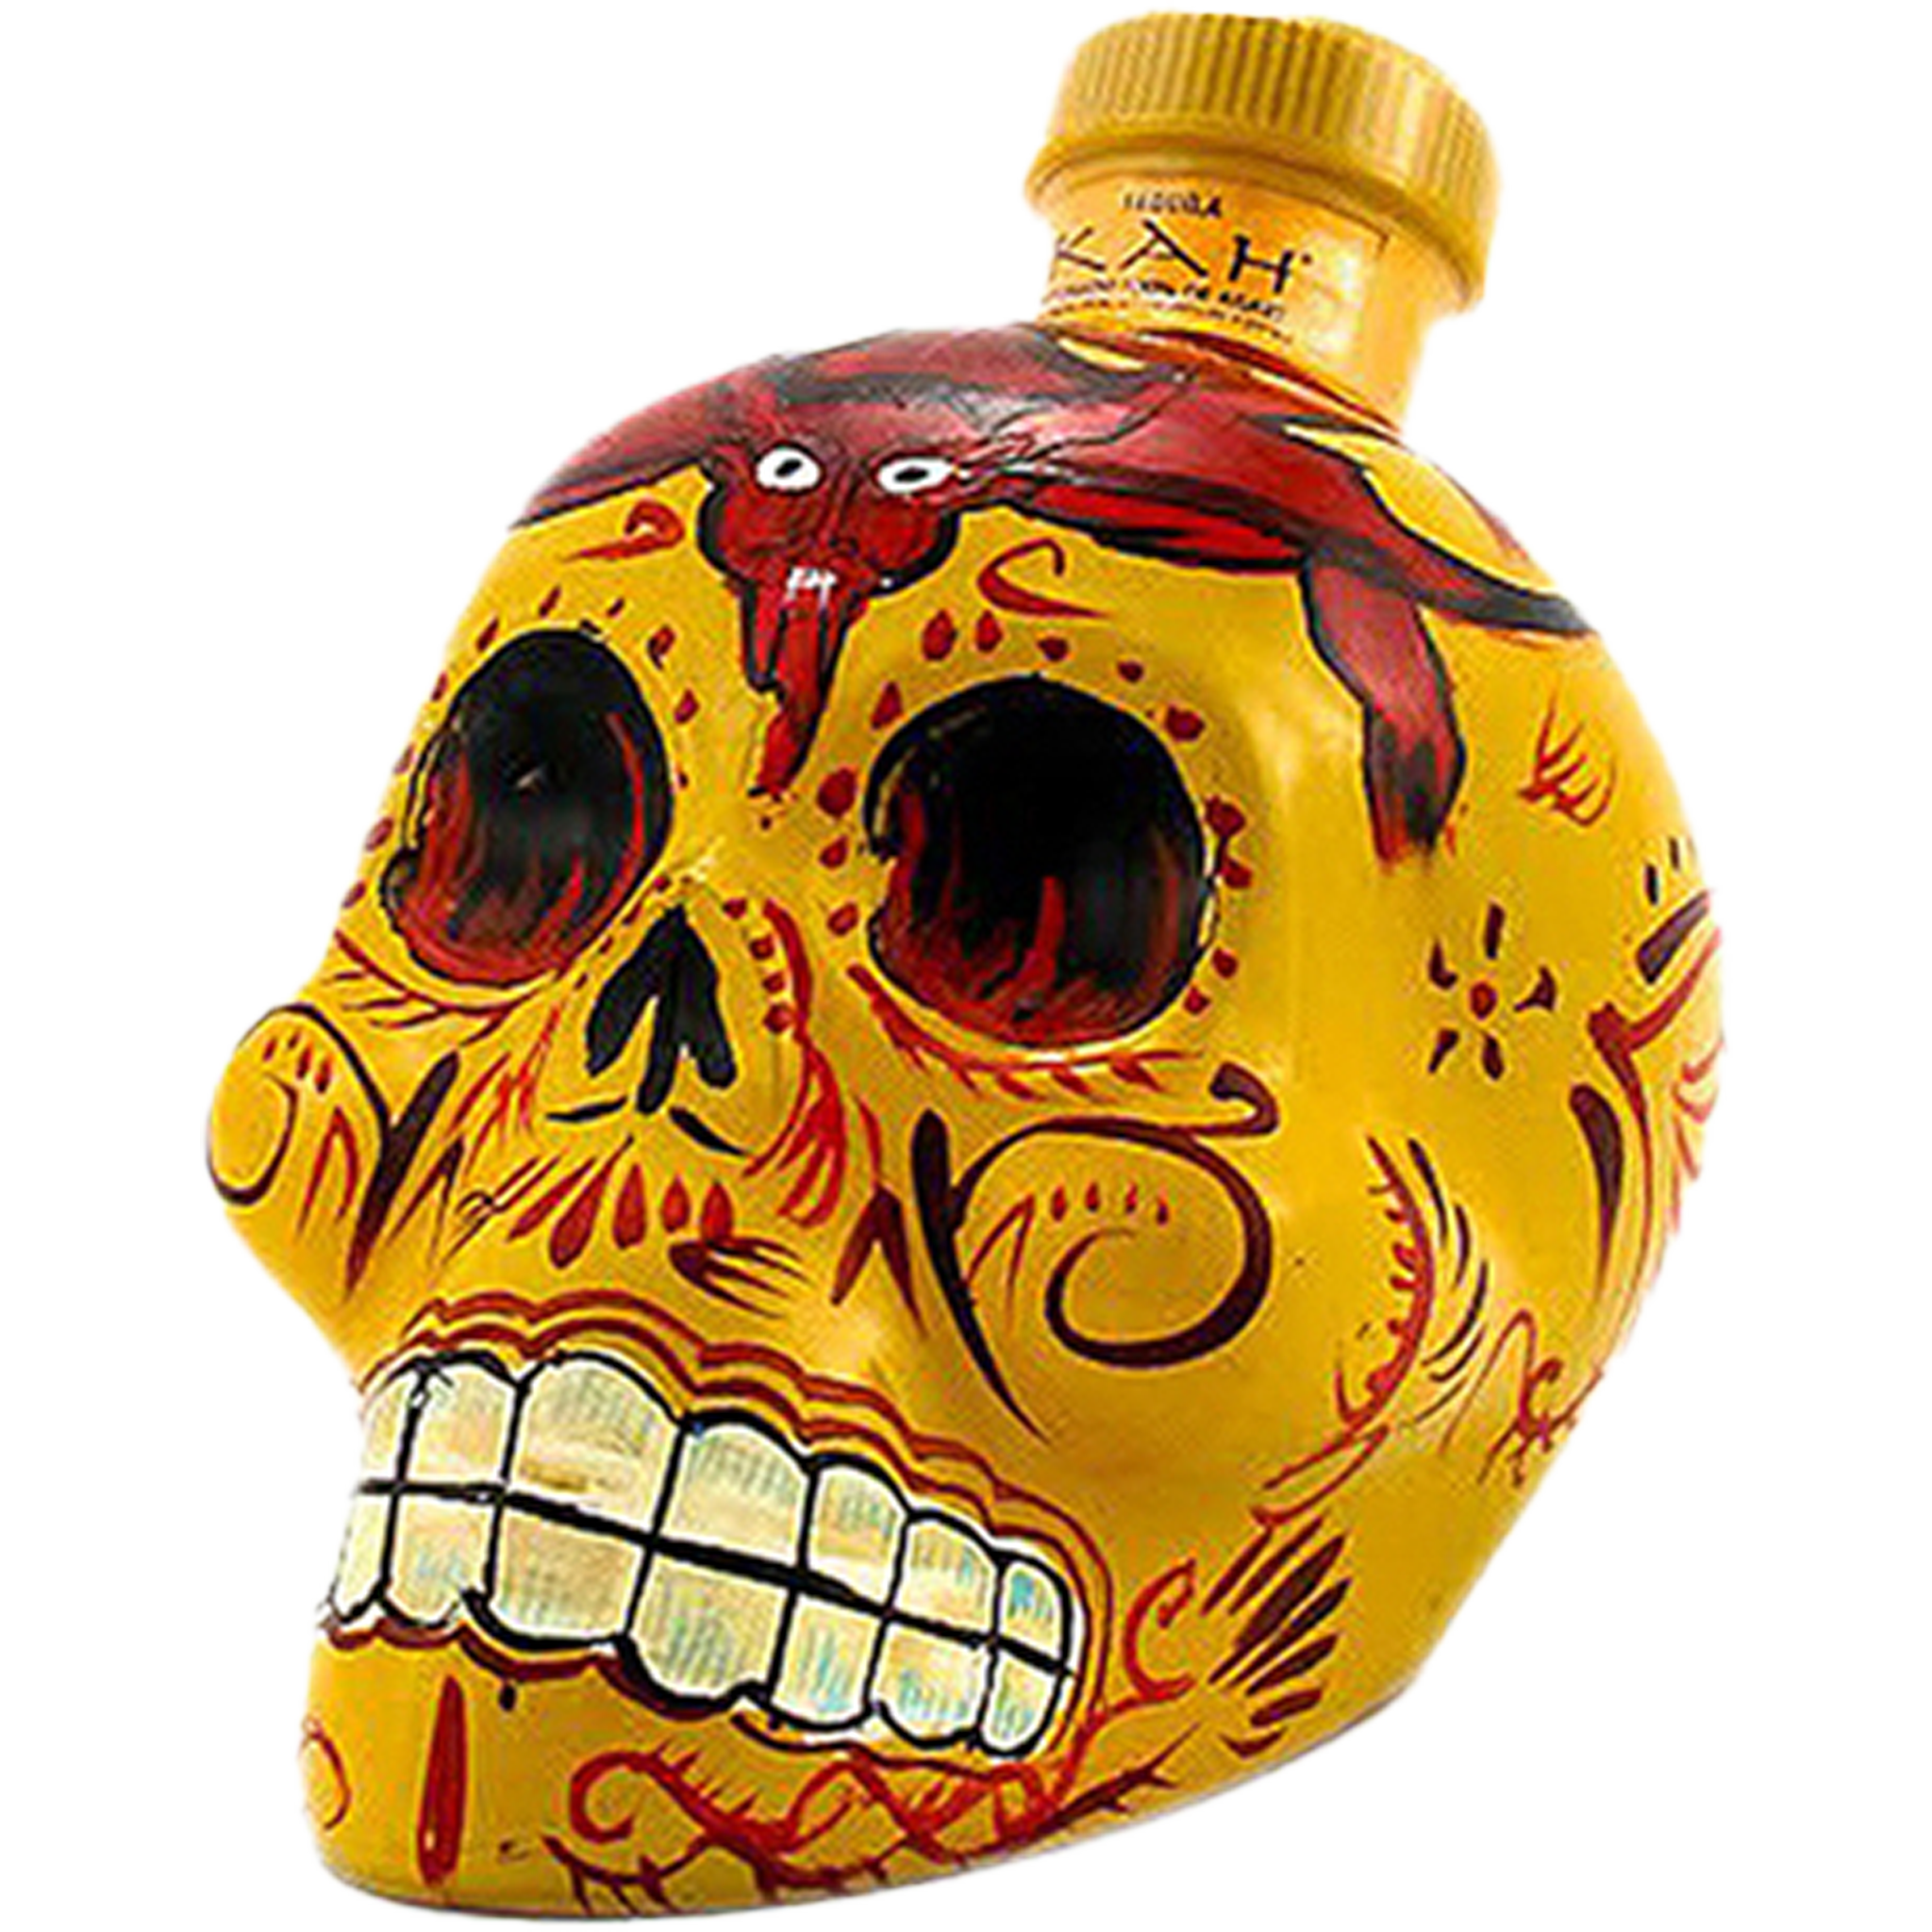 Kah Day of the Dead Tequila 750ml